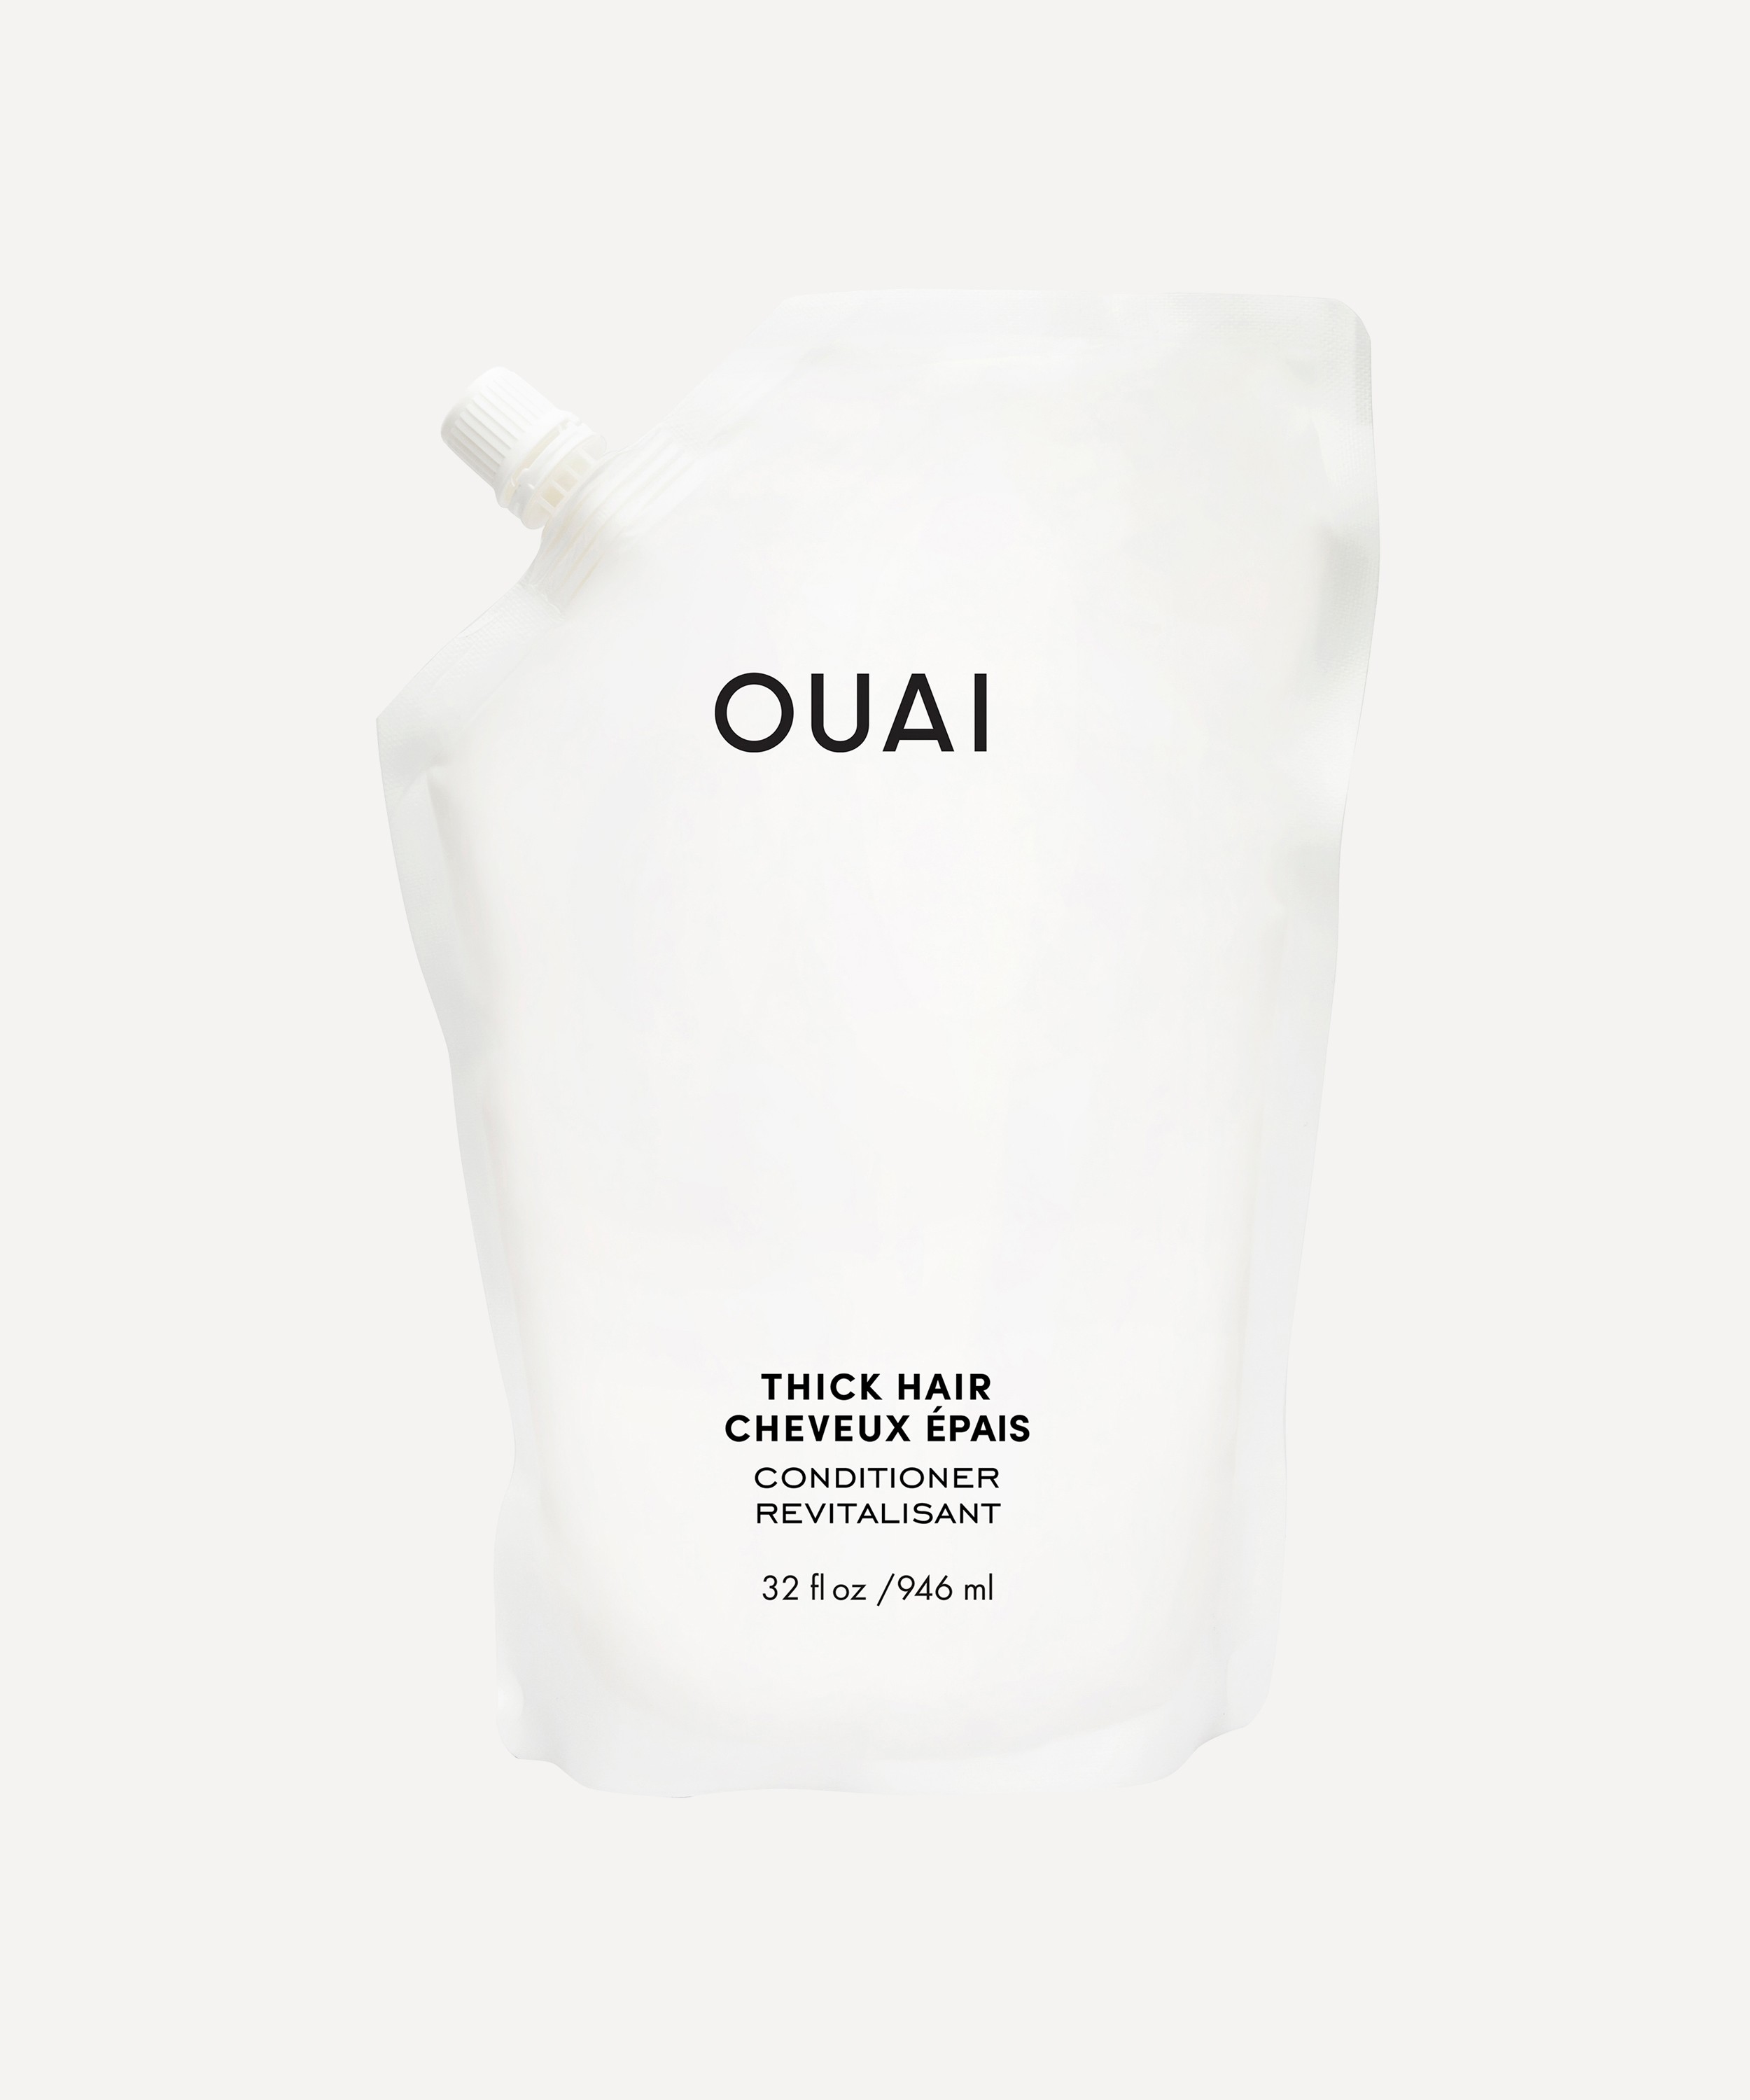 OUAI - Thick Hair Conditioner Refill 946ml image number 0